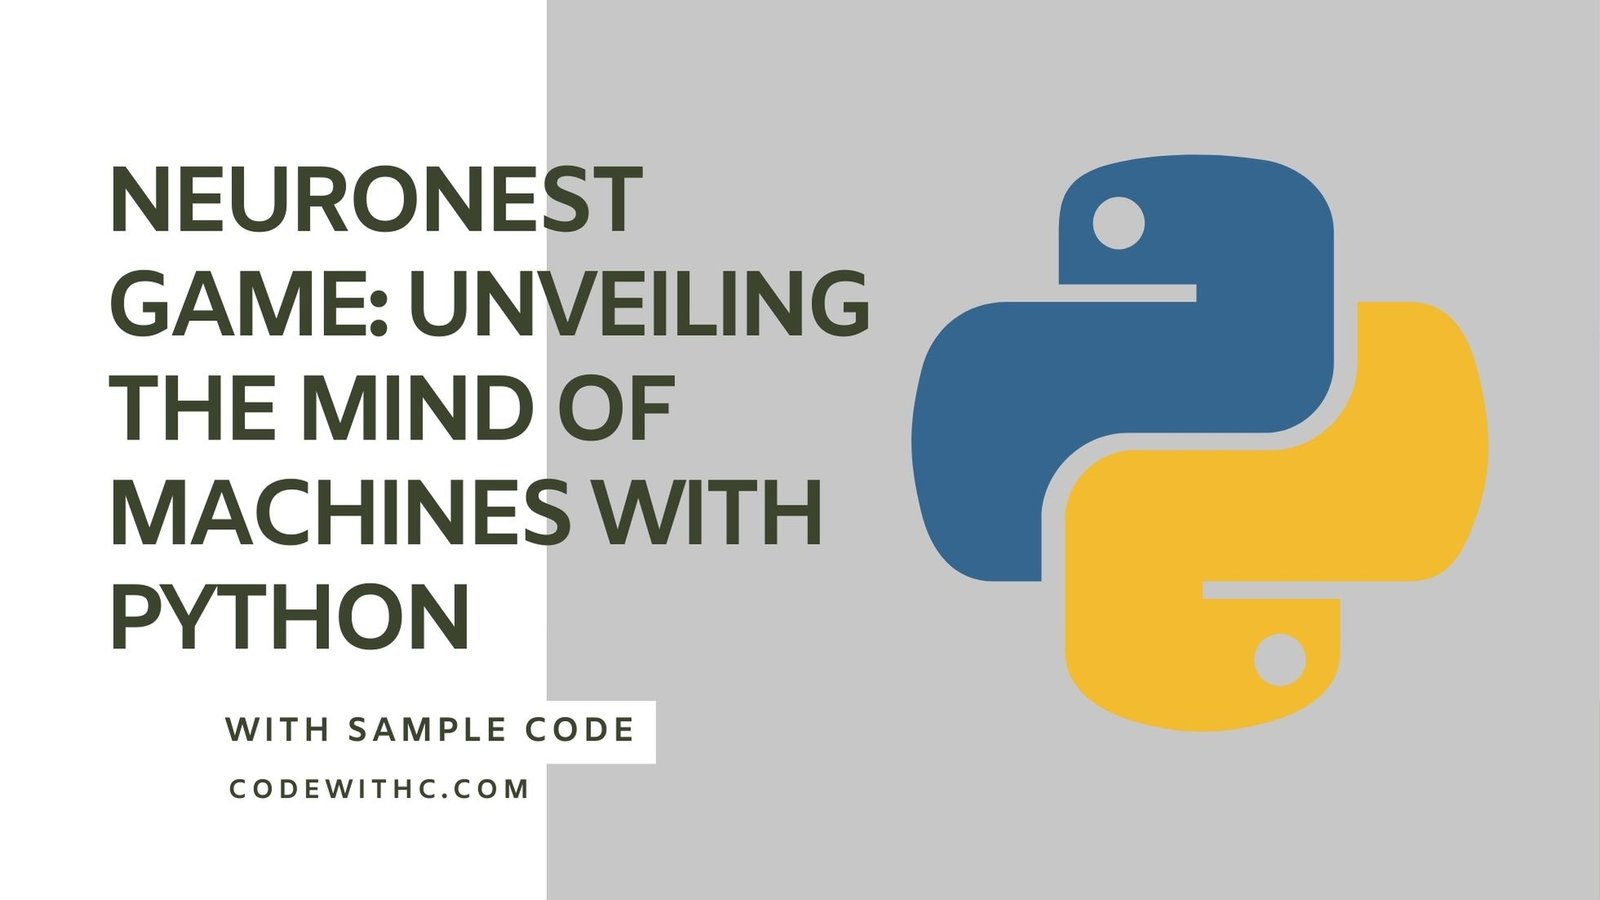 NeuroNest Game: Unveiling the Mind of Machines with Python